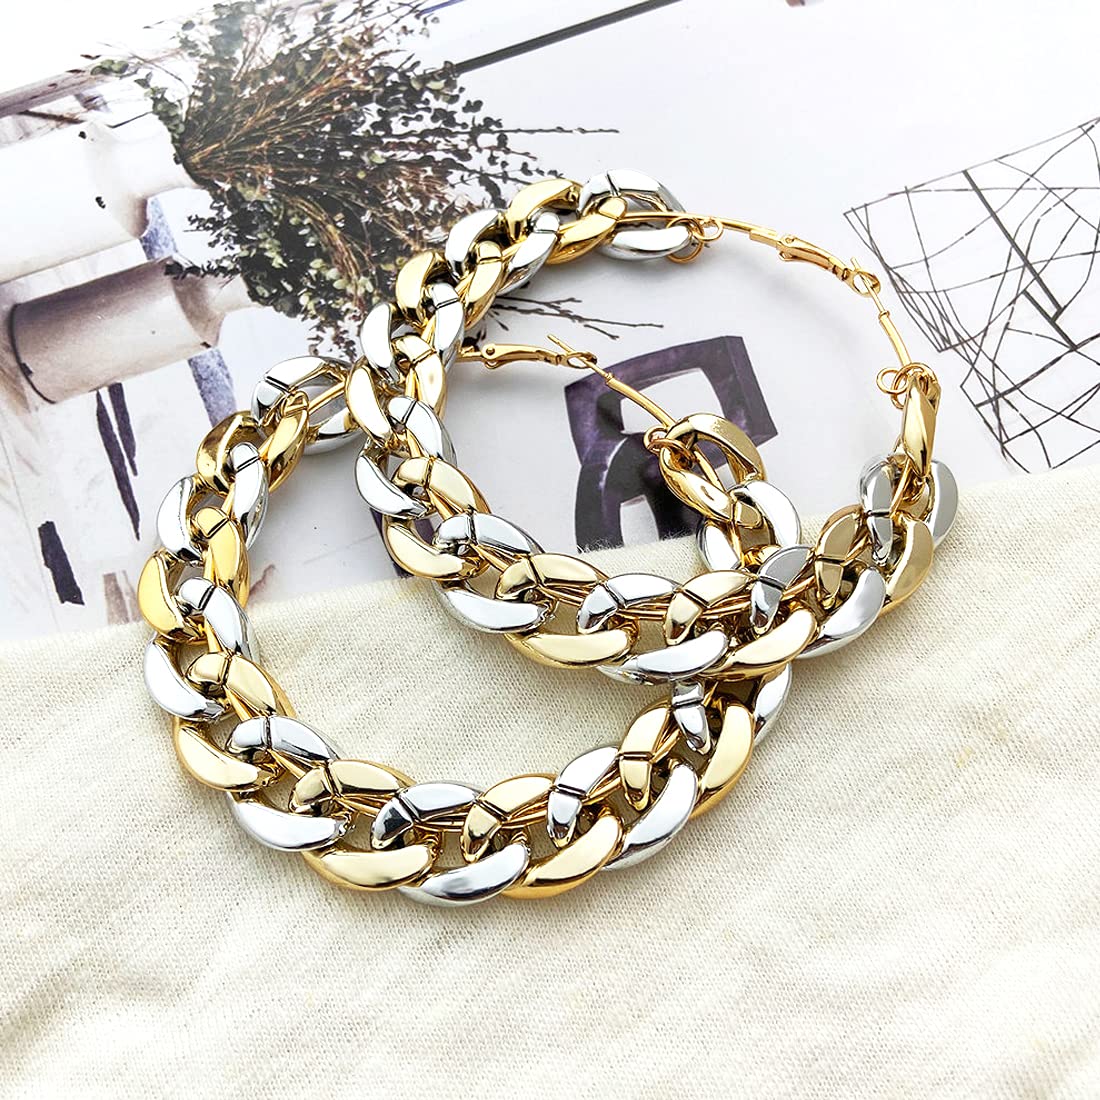 Yellow Chimes Earrings for Women and Girls Fashion Silver Gold Hoops | Dual Tone Punk Cuban Chain Big Circle Hoop Earrings | Birthday Gift for girls and women Anniversary Gift for Wife